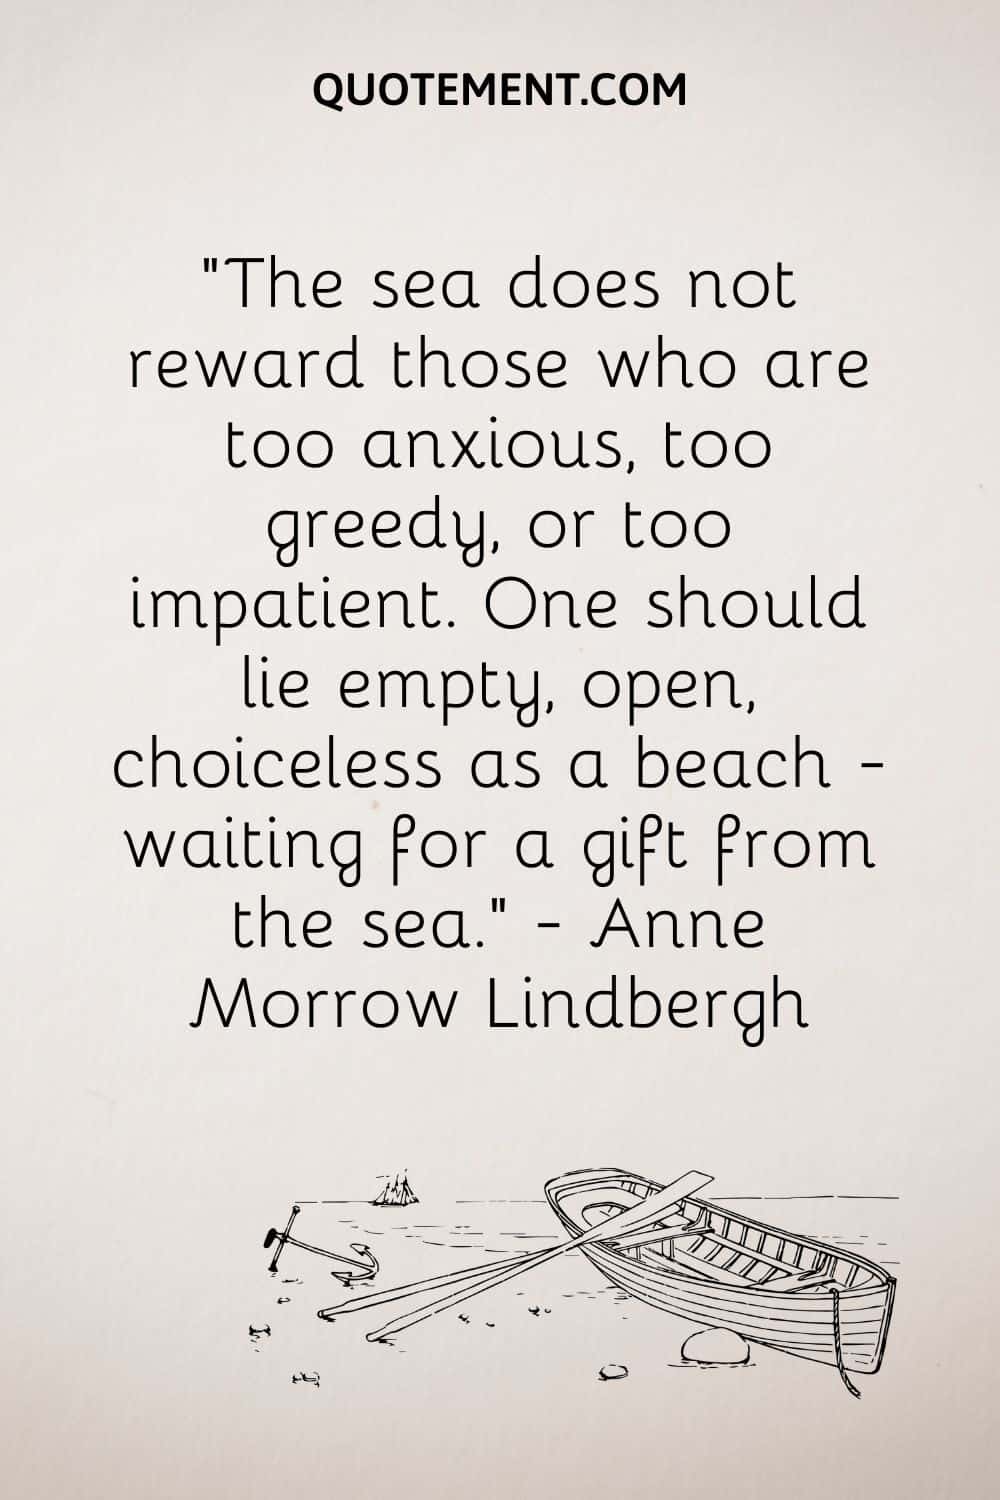 The sea does not reward those who are too anxious, too greedy, or too impatient. One should lie empty, open, choiceless as a beach - waiting for a gift from the sea. — Anne Morrow Lindbergh